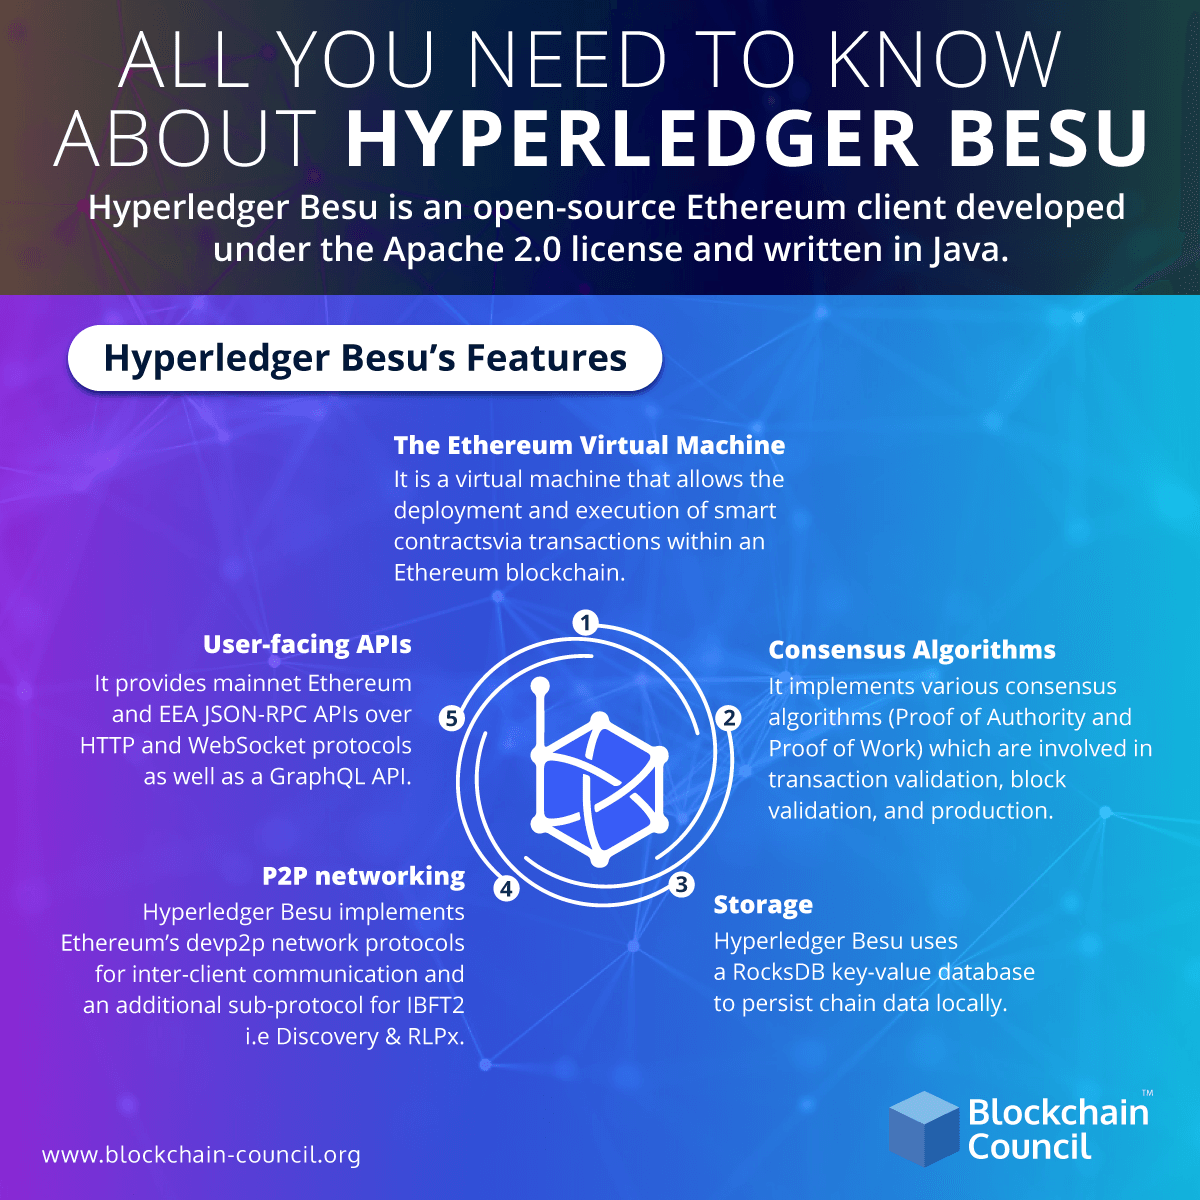 All-you-need-to-know-about-Hyperledger-Besu